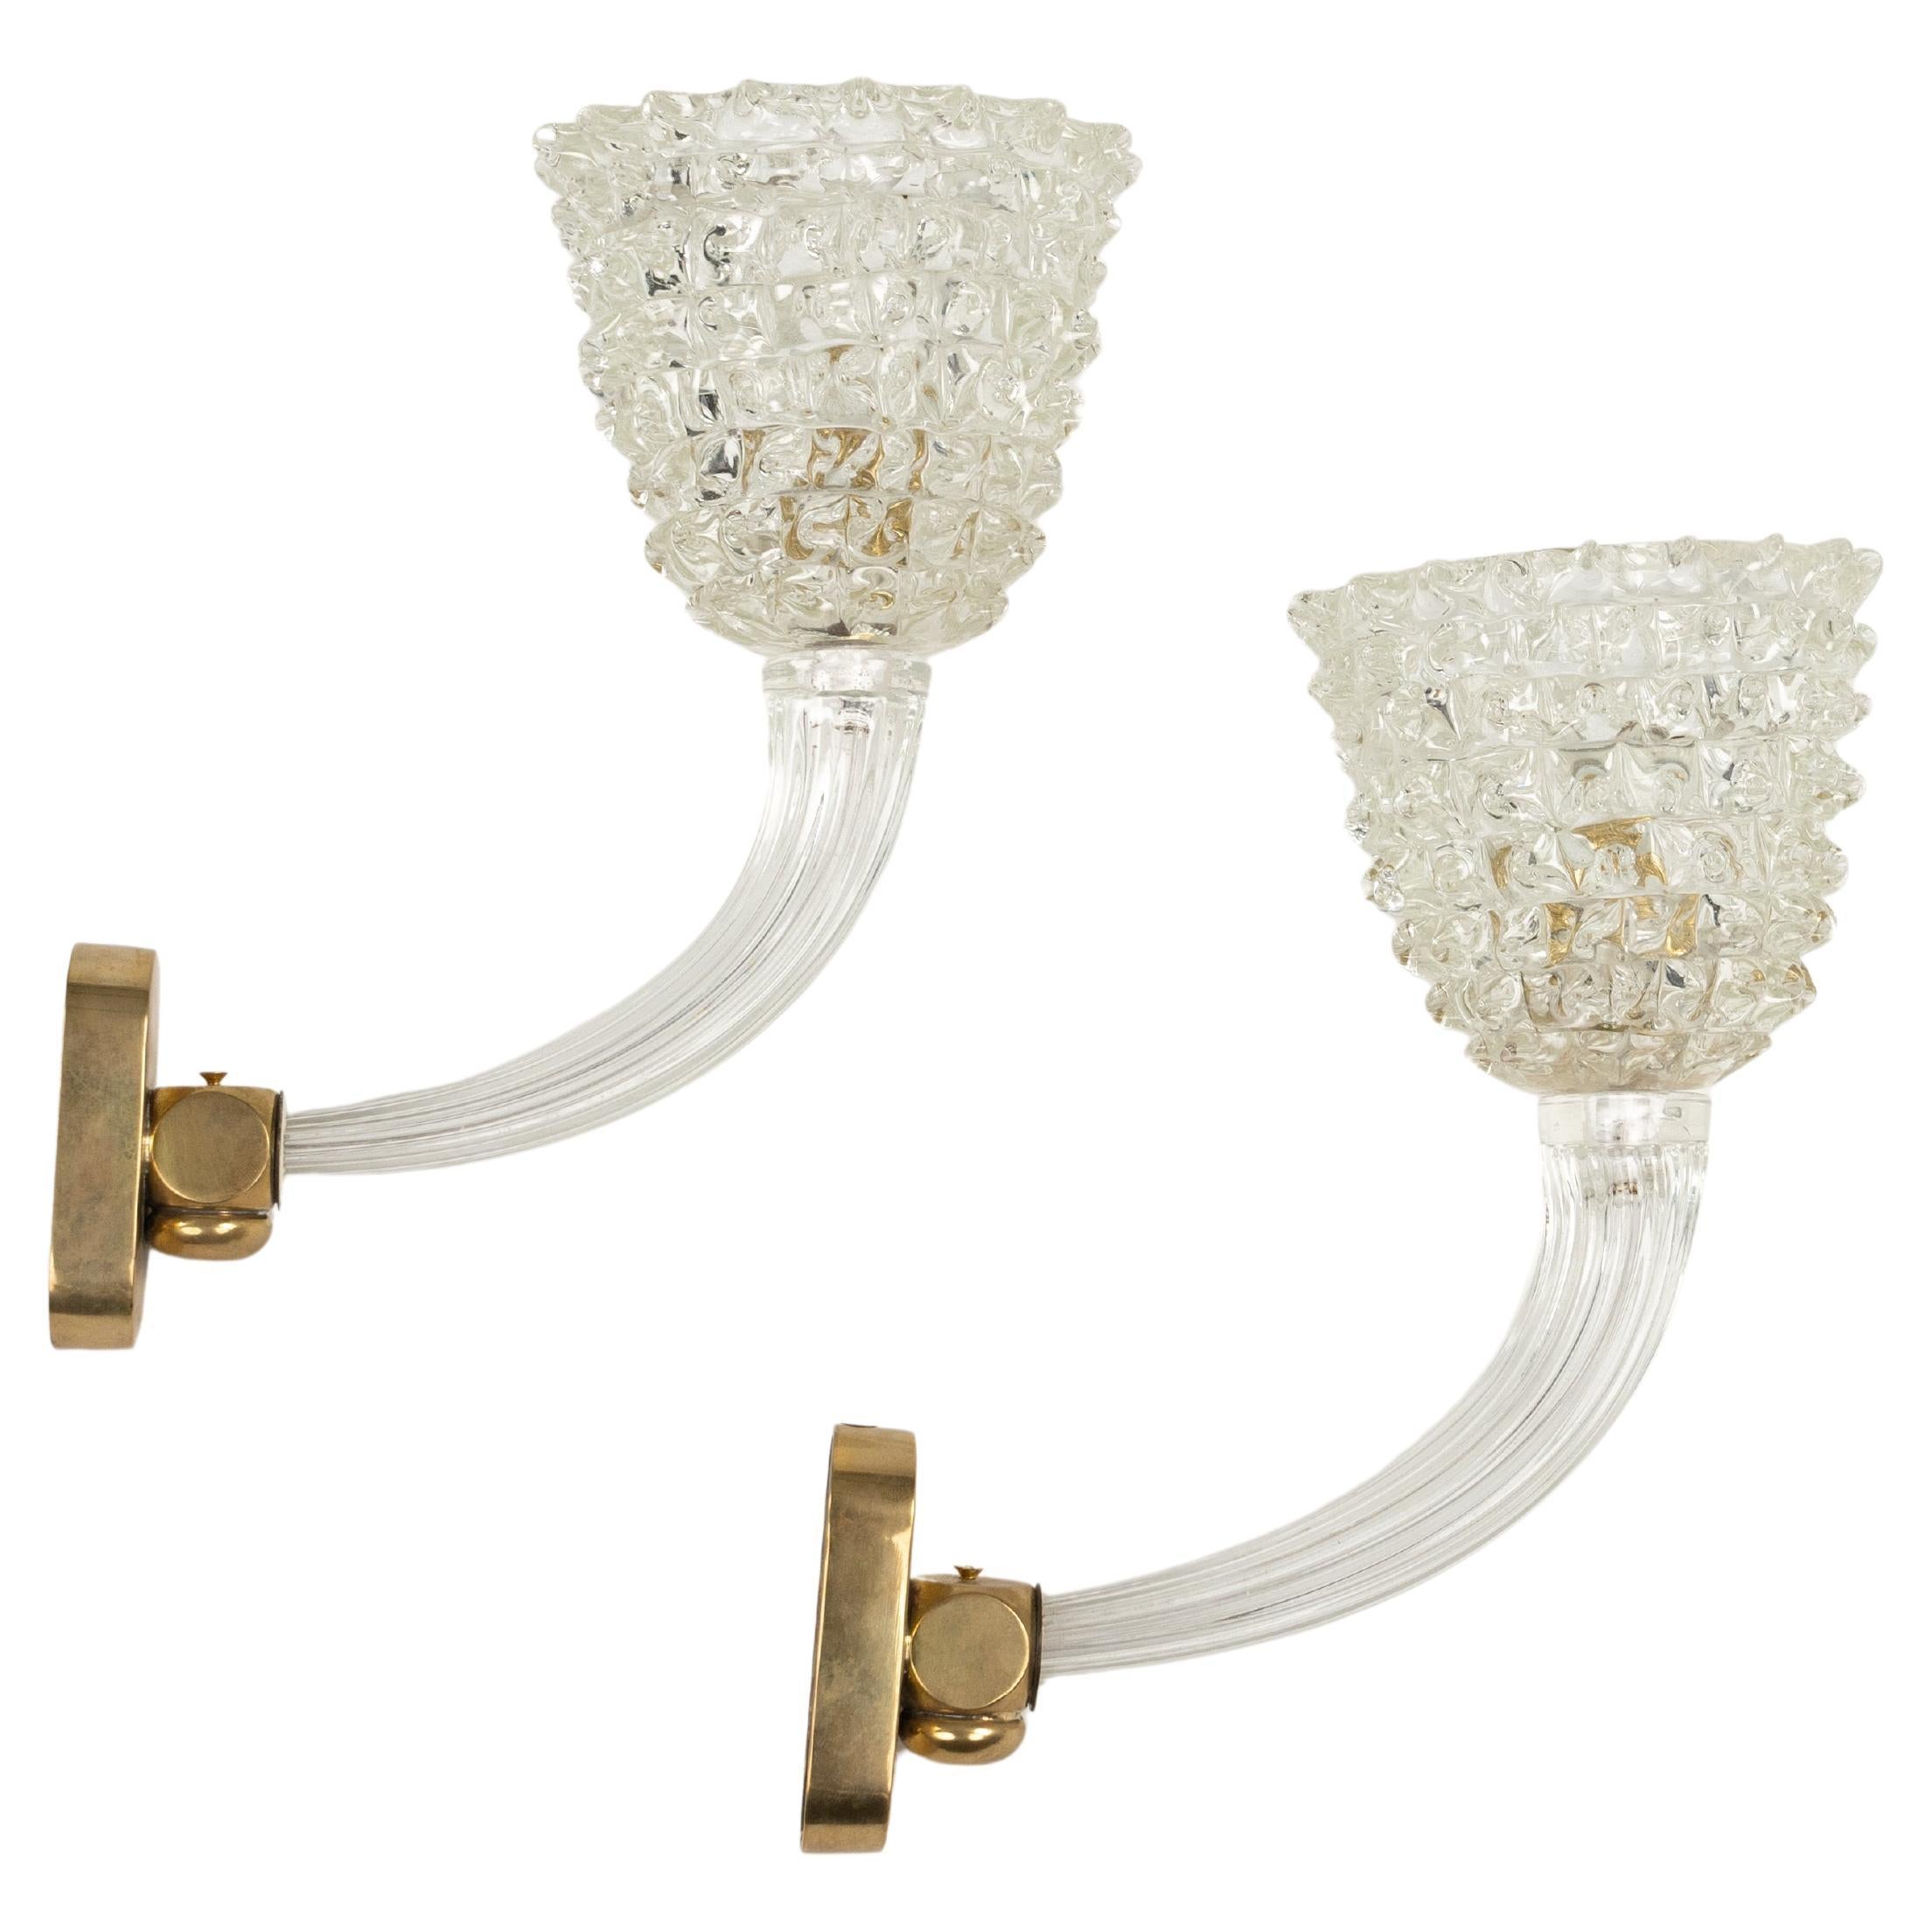 Pair of Sconces Rostrato Murano Glass & Brass Barovier & Toso Style, Italy 1950s For Sale 6